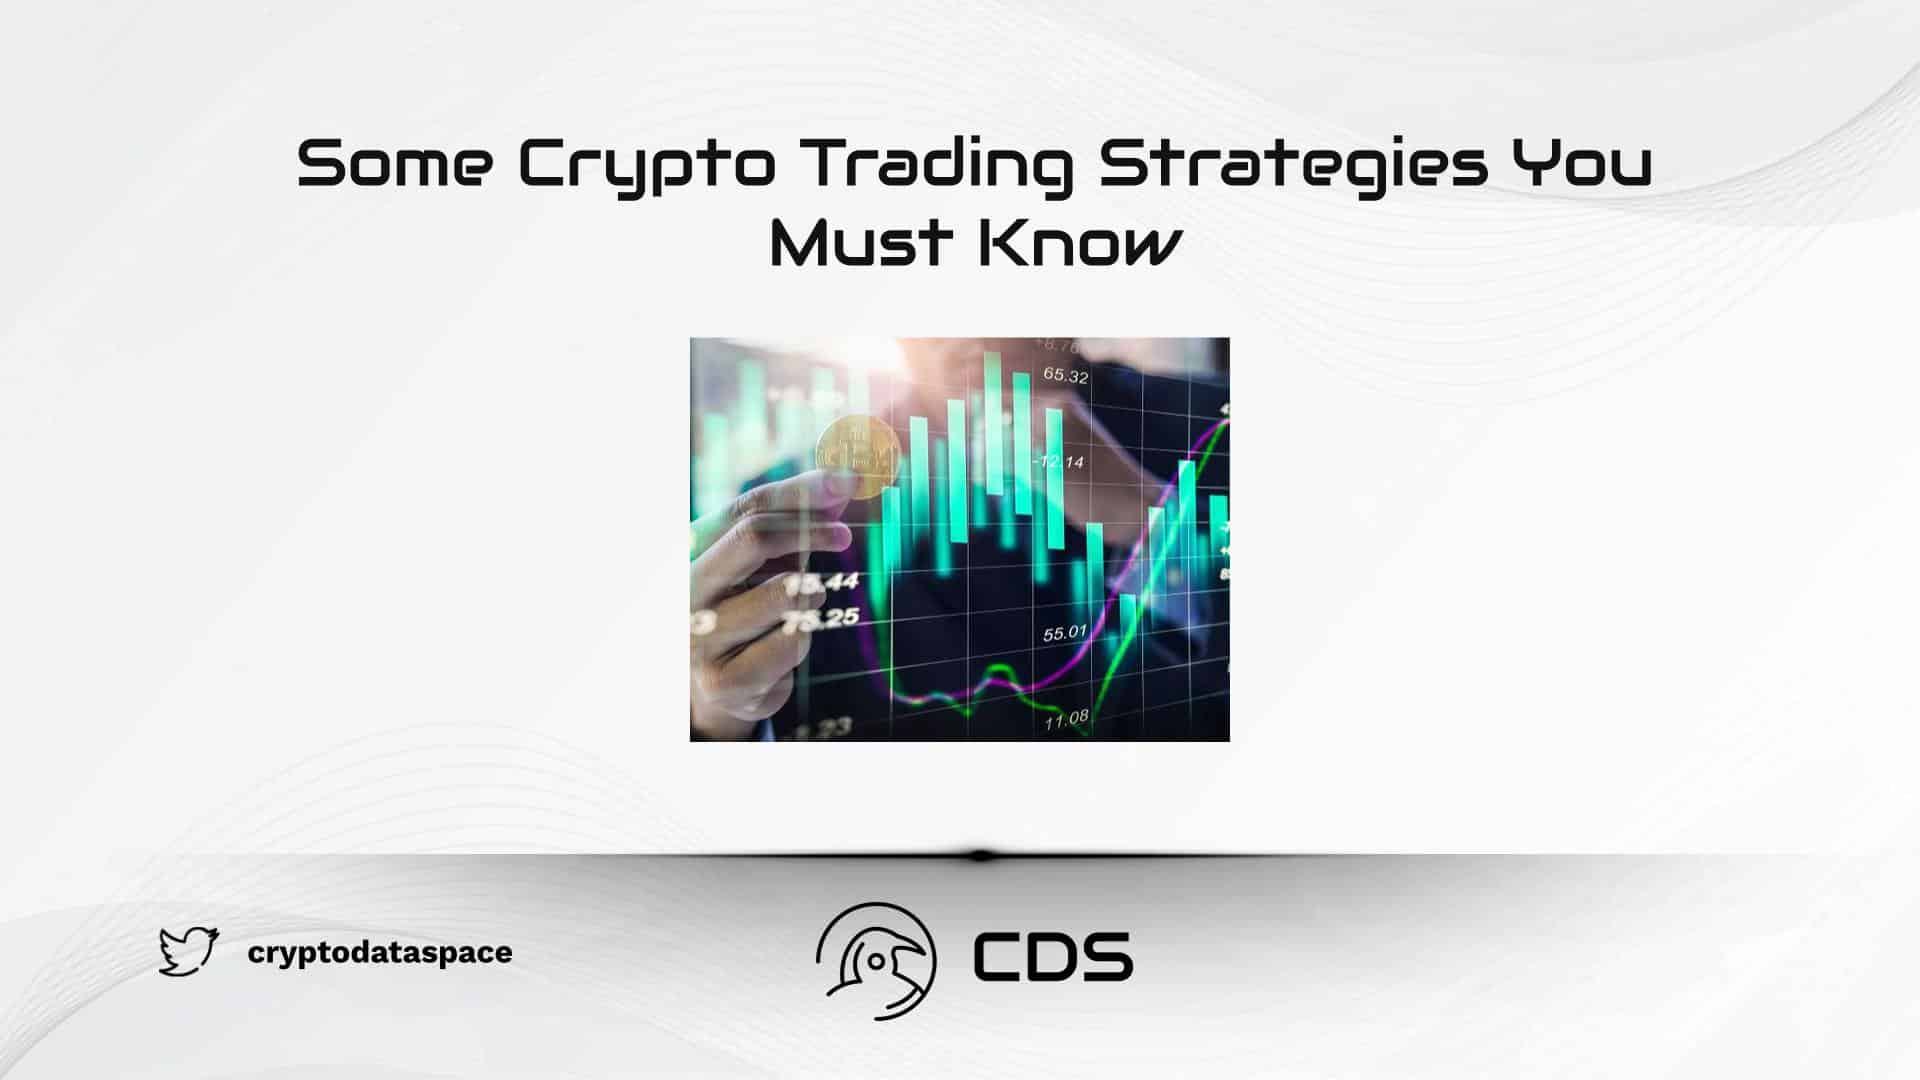 Some Crypto Trading Strategies You Must Know